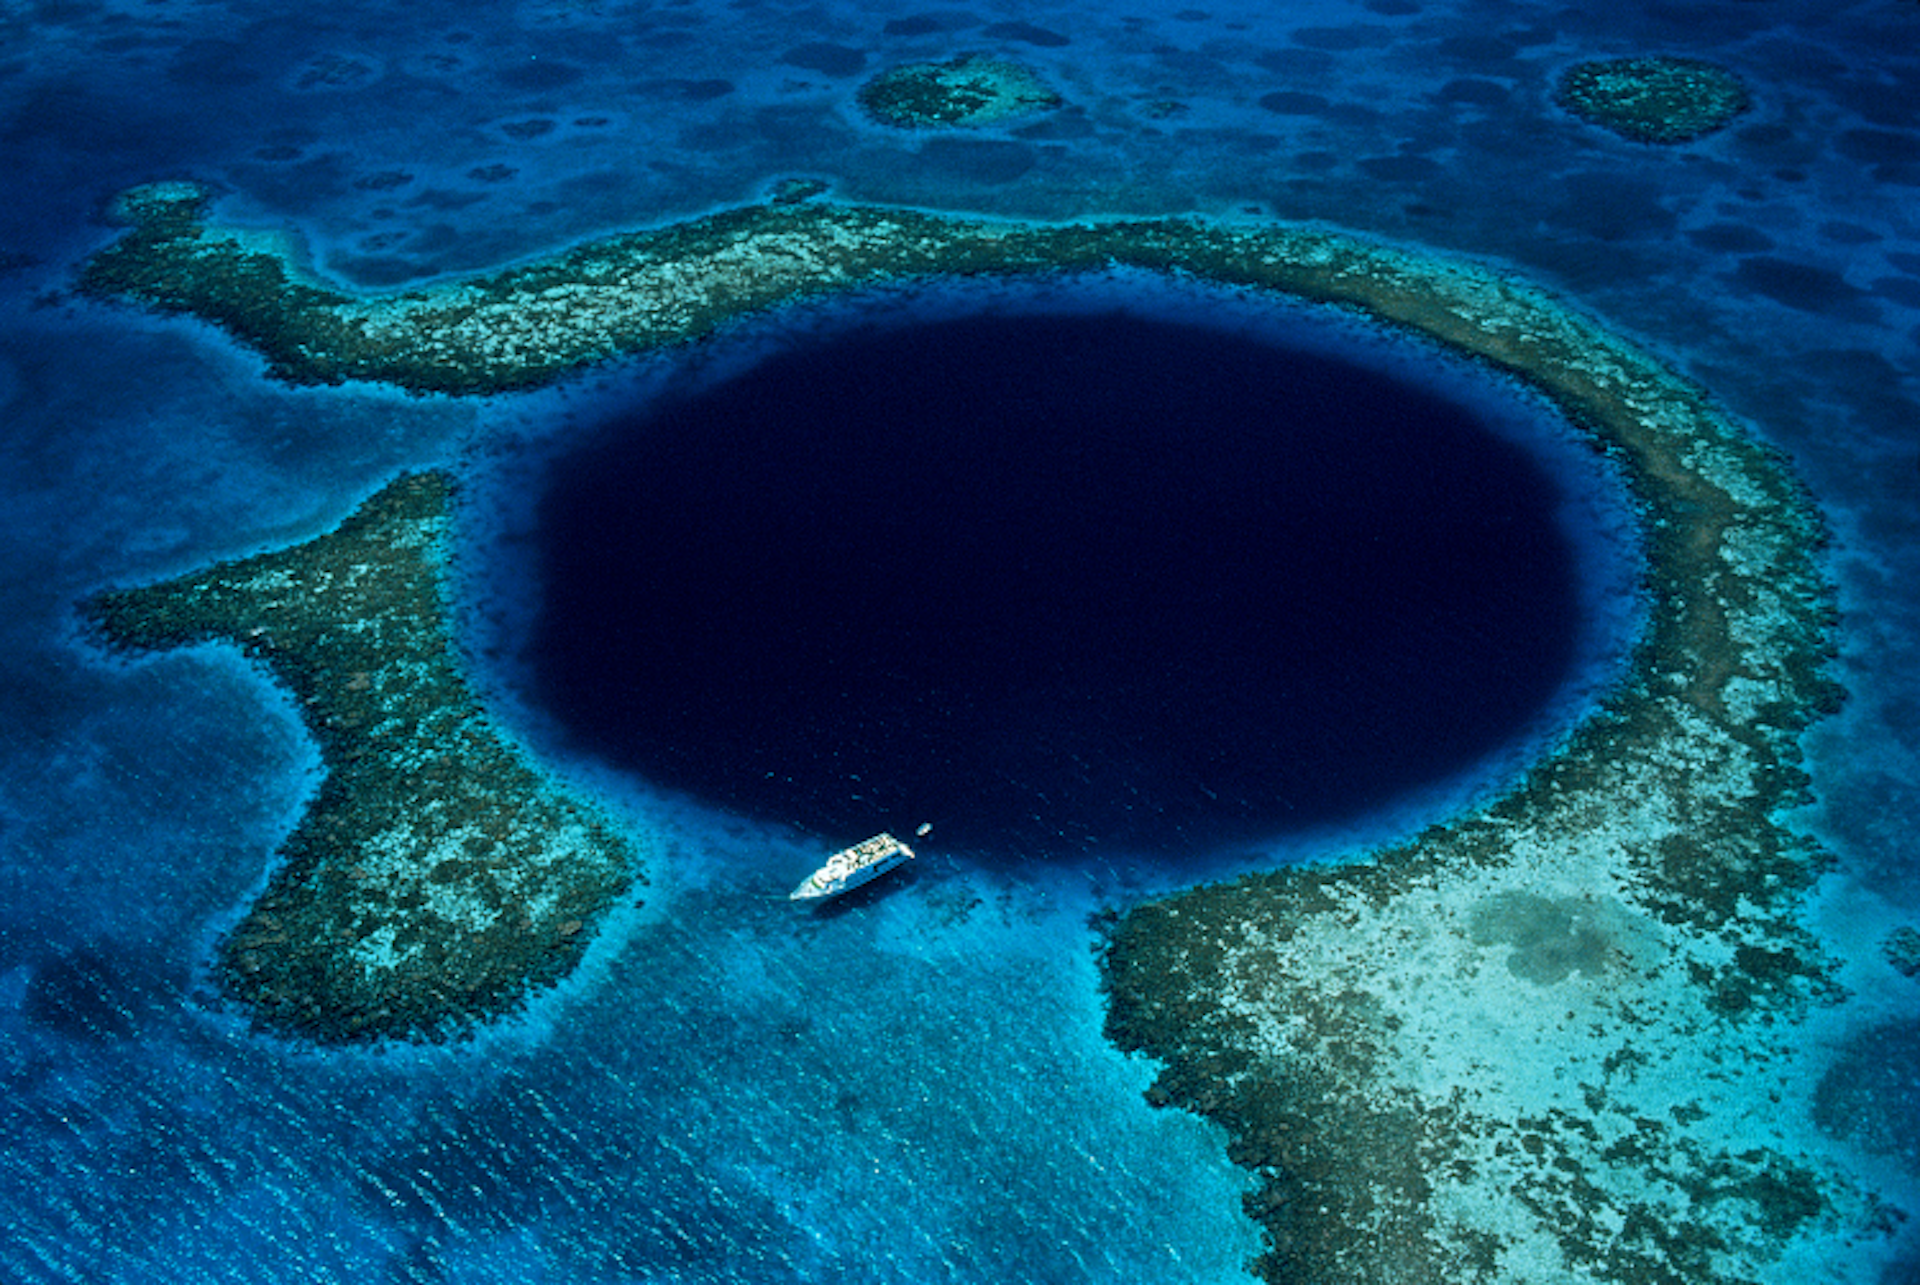 Aerial view of the Great Blue Hole. Image by Schafer & Hill / Getty Images